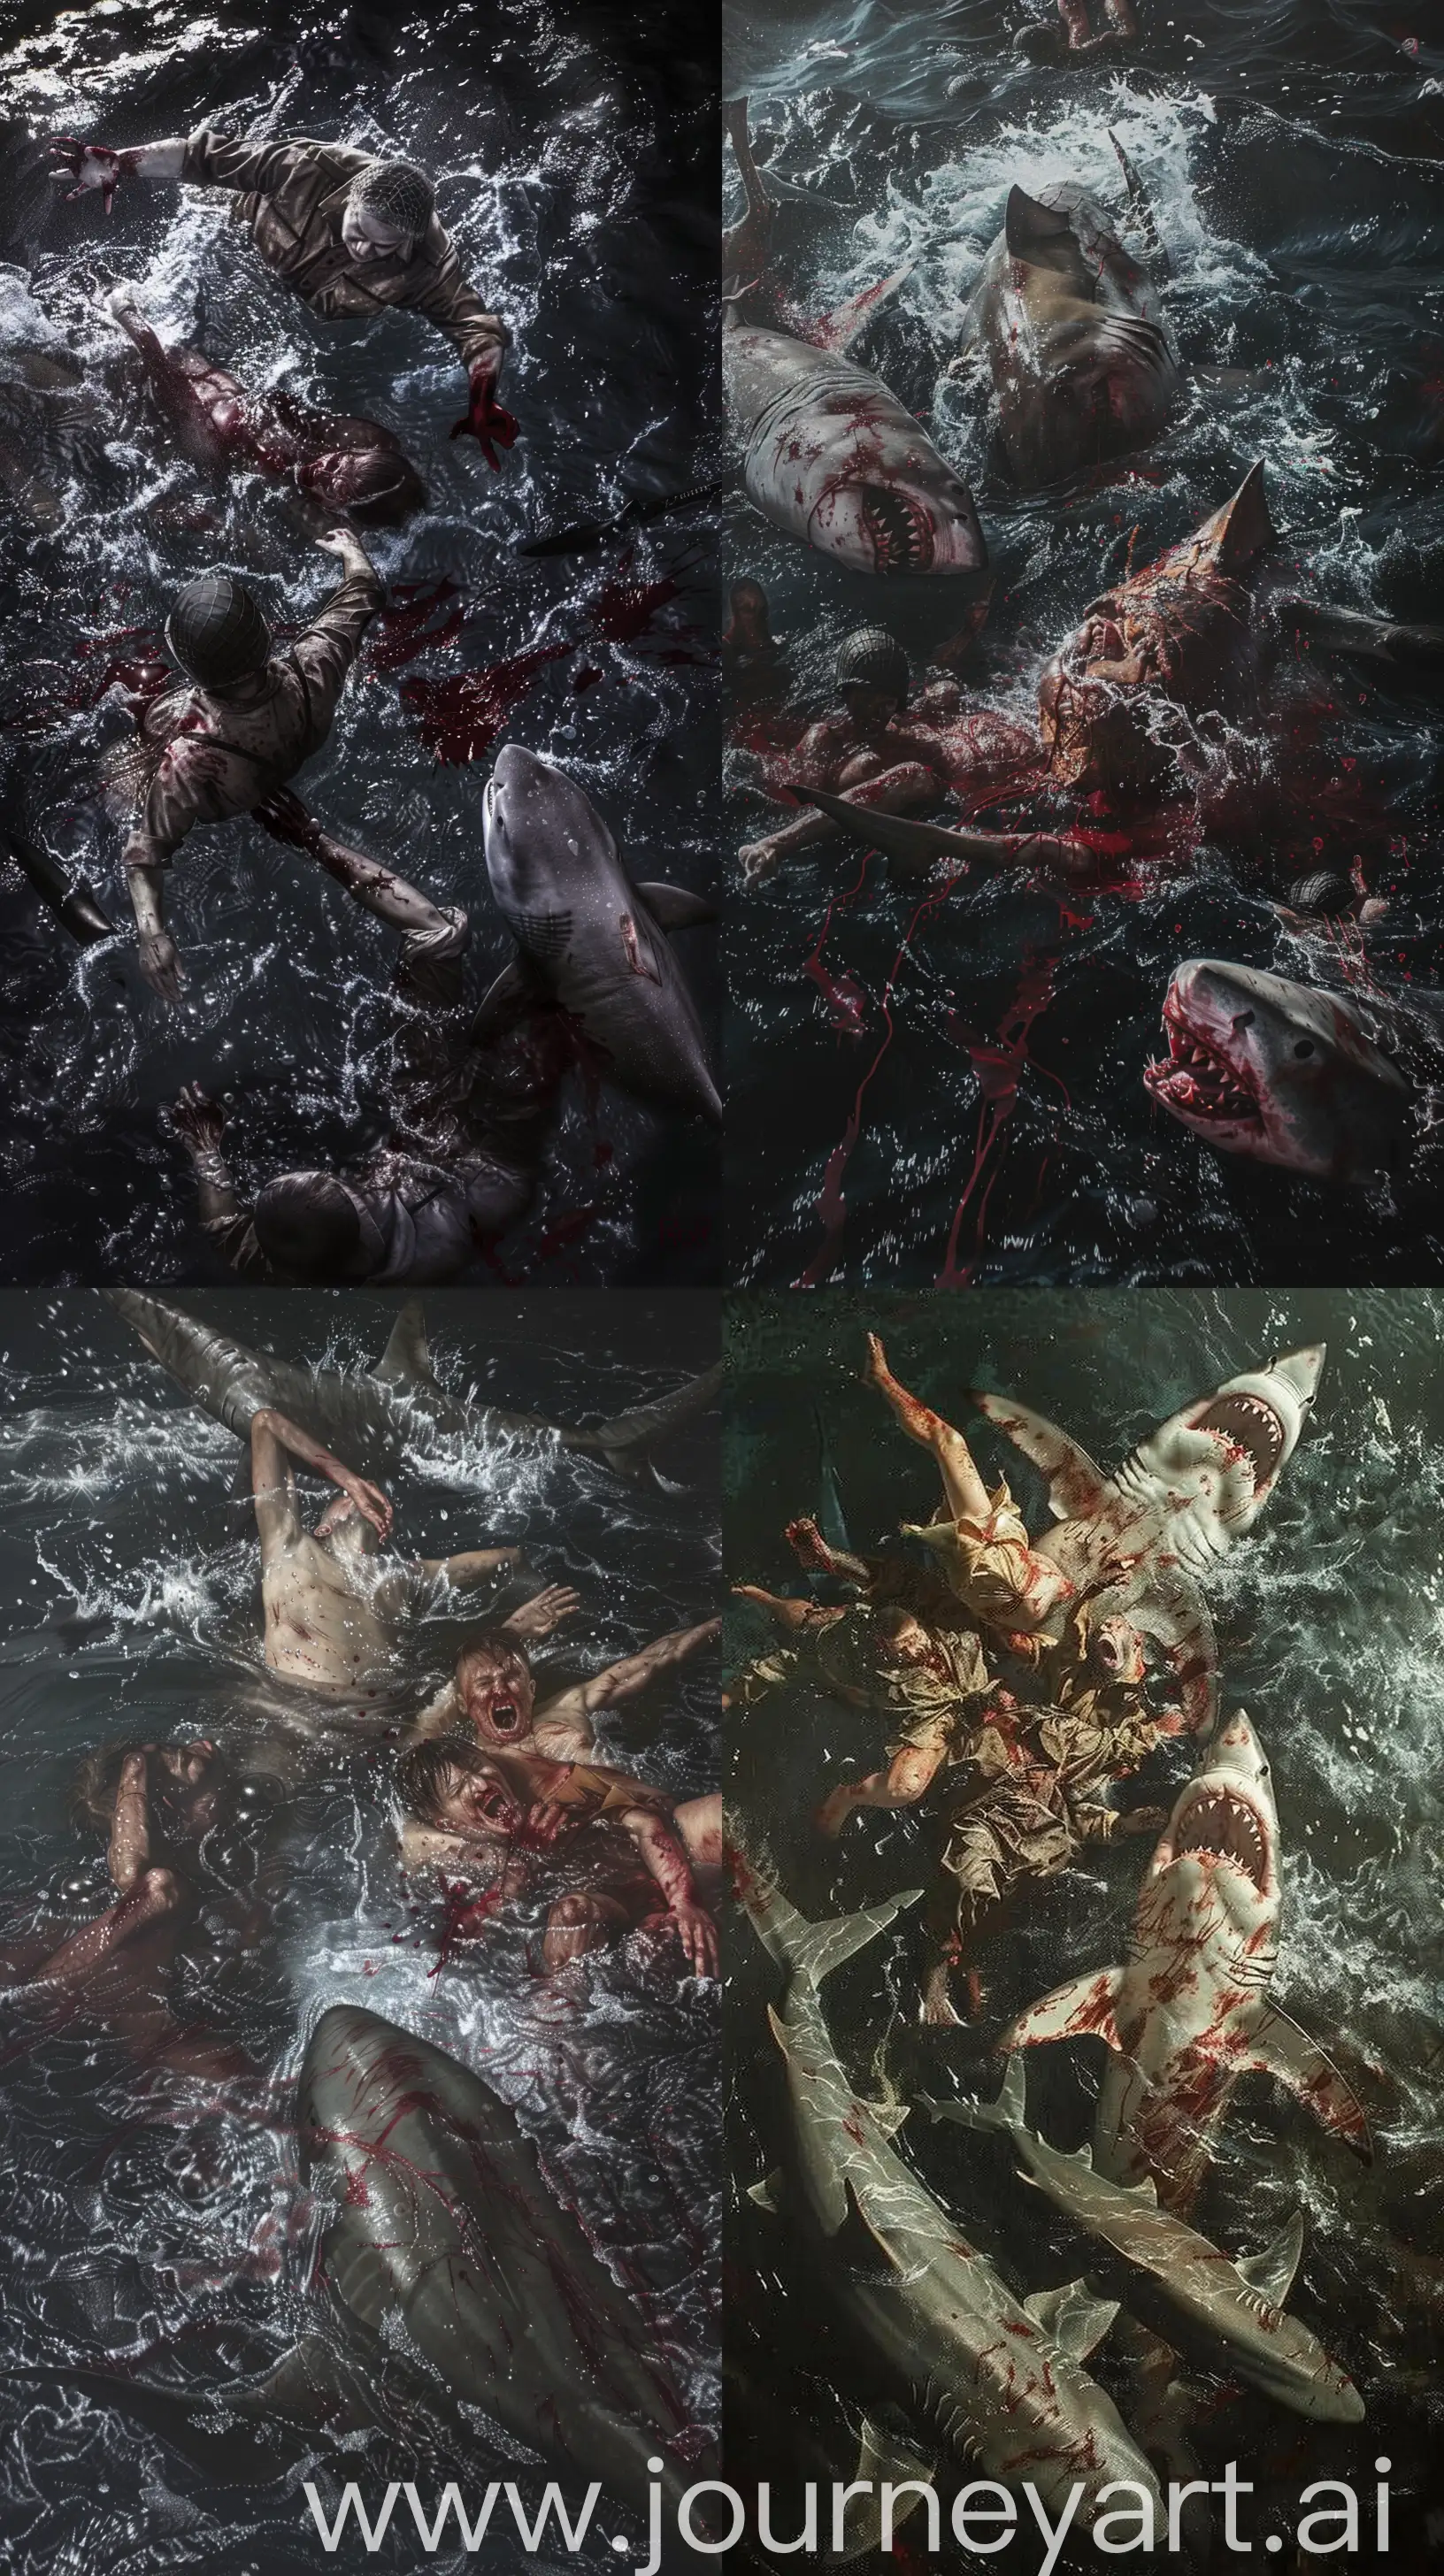  survivors in treacherous waters, trauma, World War II, sharks circling, the toll of survival, hyper-realistic, dark waters, high distress, injuries evident, blood trails, photorealistic painting, harrowing scene --ar 9:16 